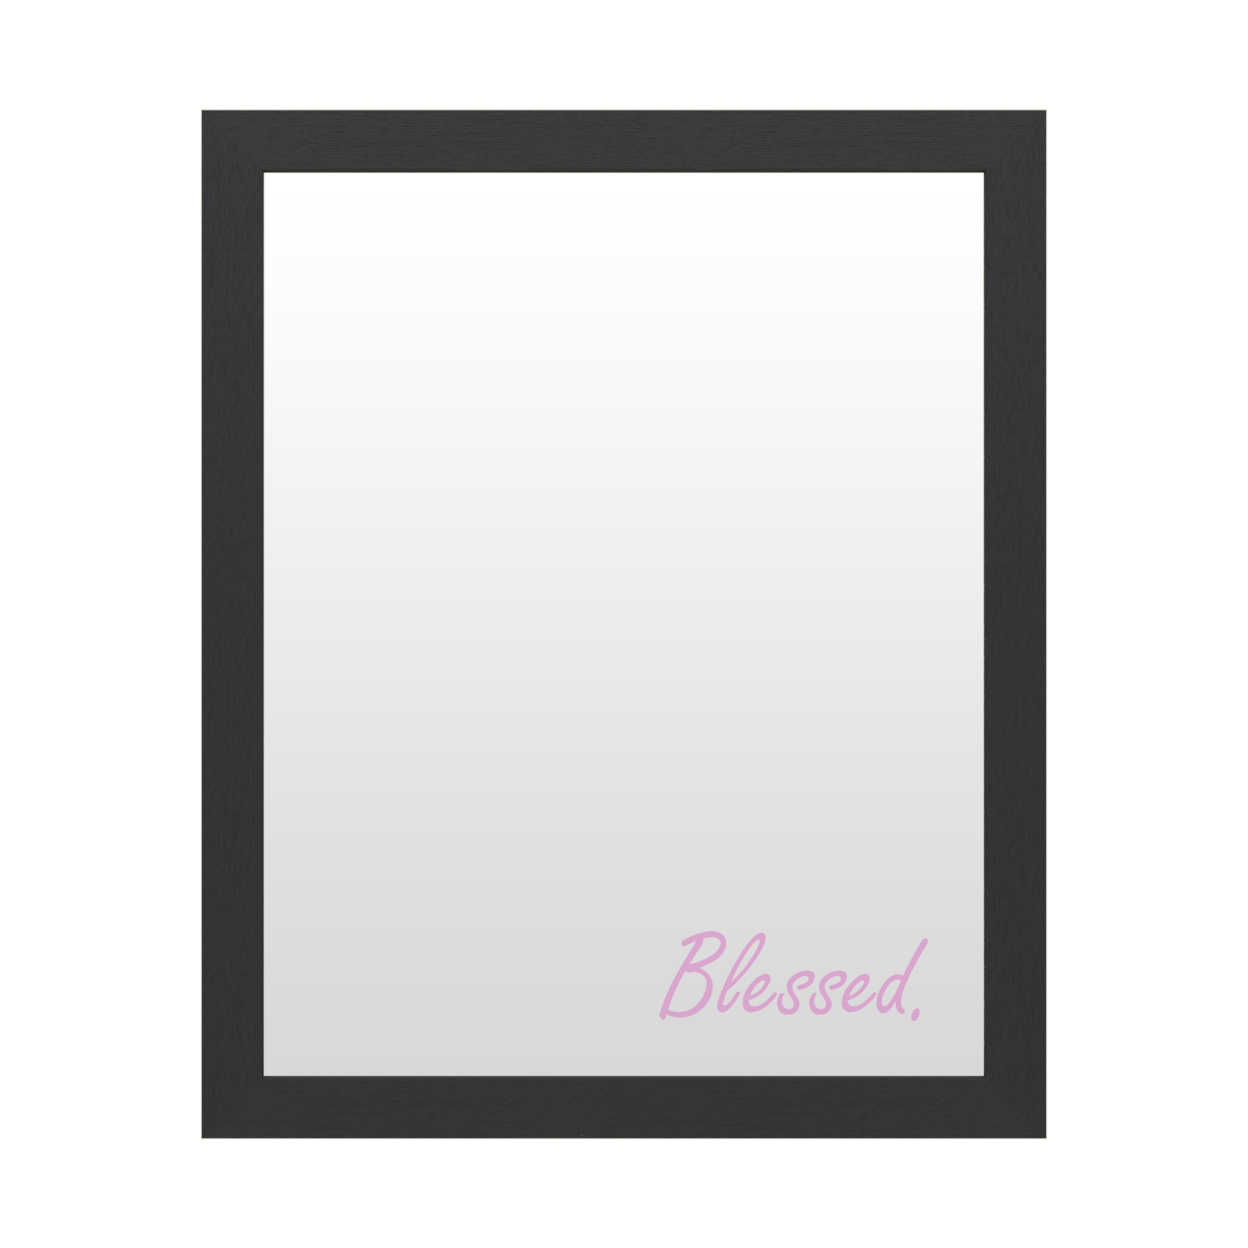 Dry Erase 16 X 20 Marker Board With Printed Artwork - Blessed Script Pink White Board - Ready To Hang